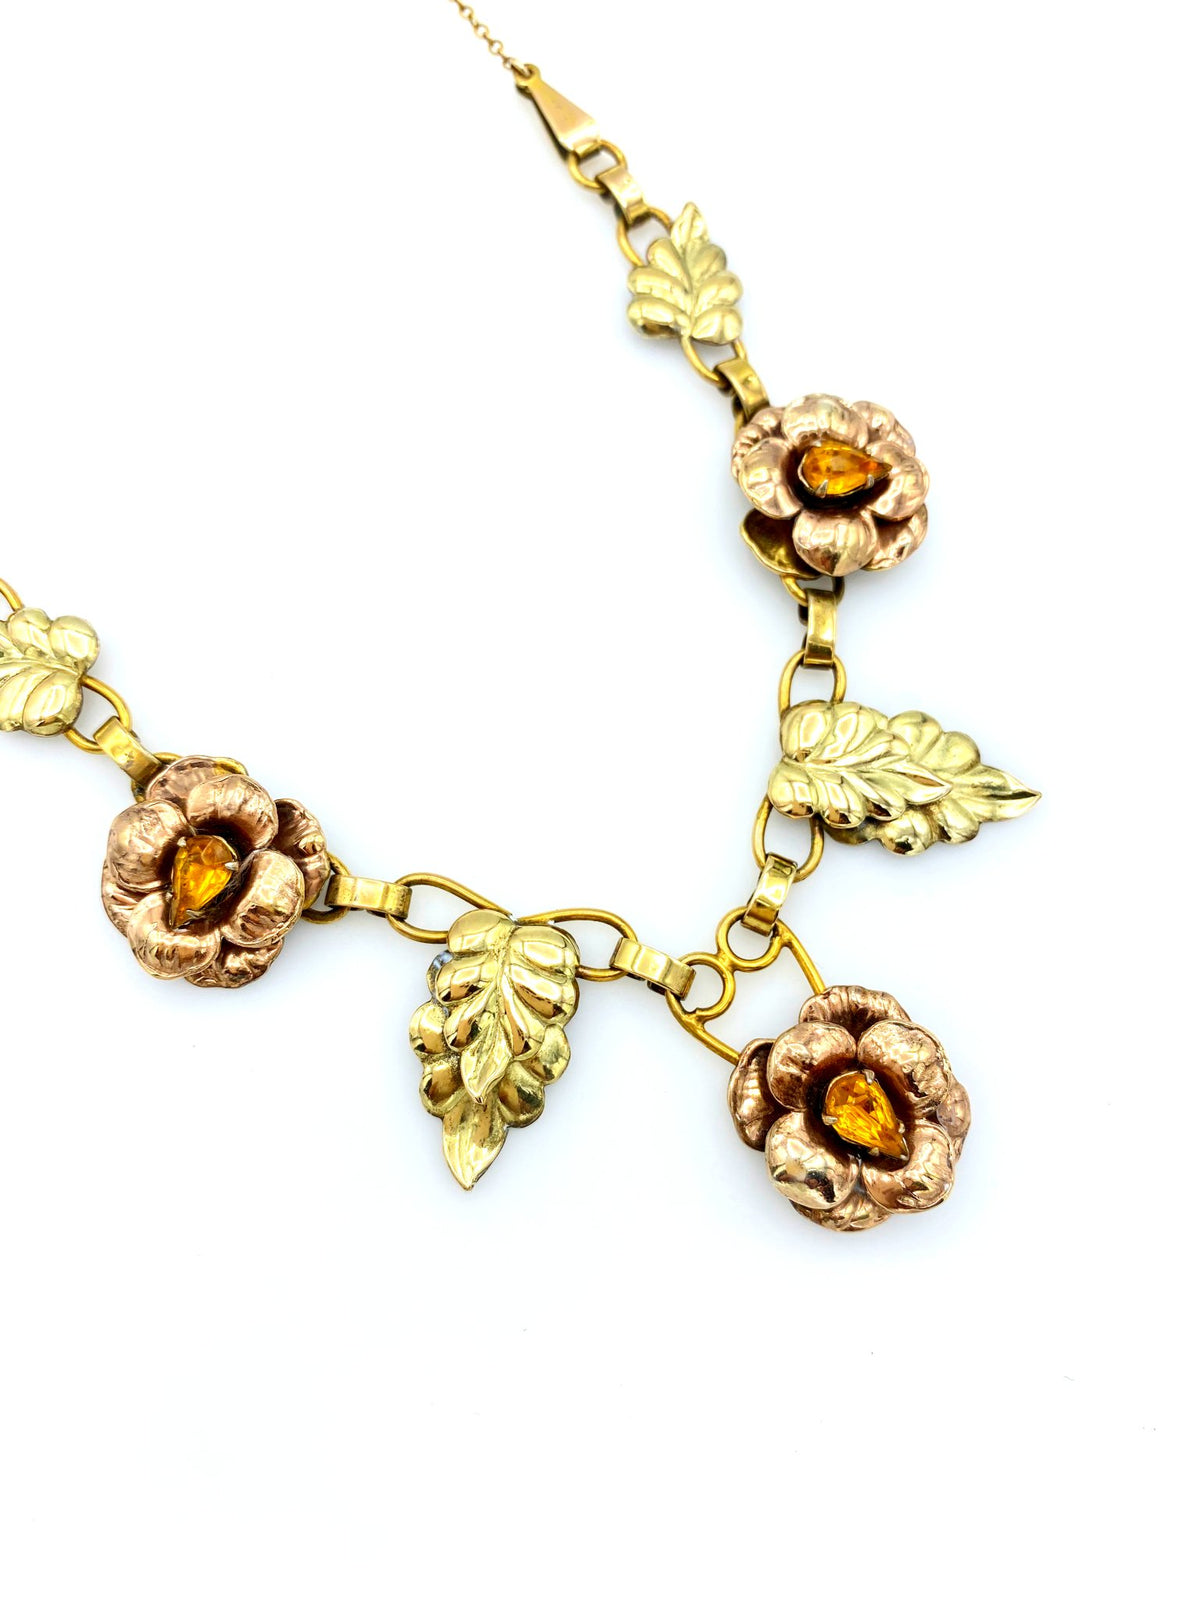 Gold Filled Floral Rhinestone Vintage Pendant - 24 Wishes Vintage Jewelry